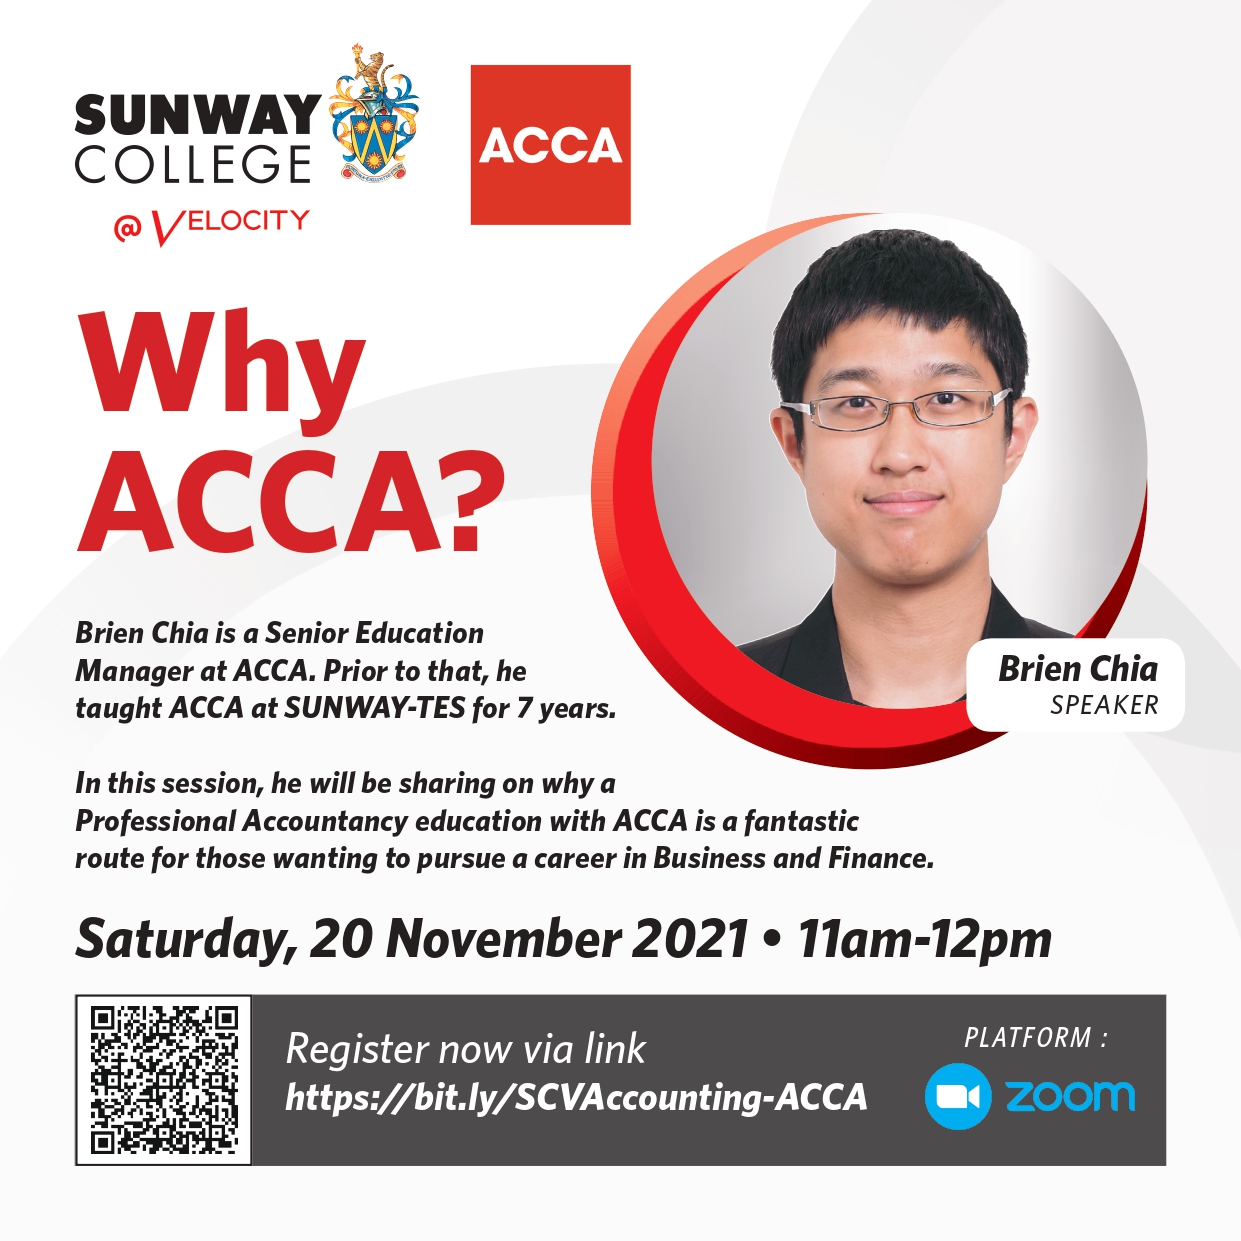 WHY ACCA?